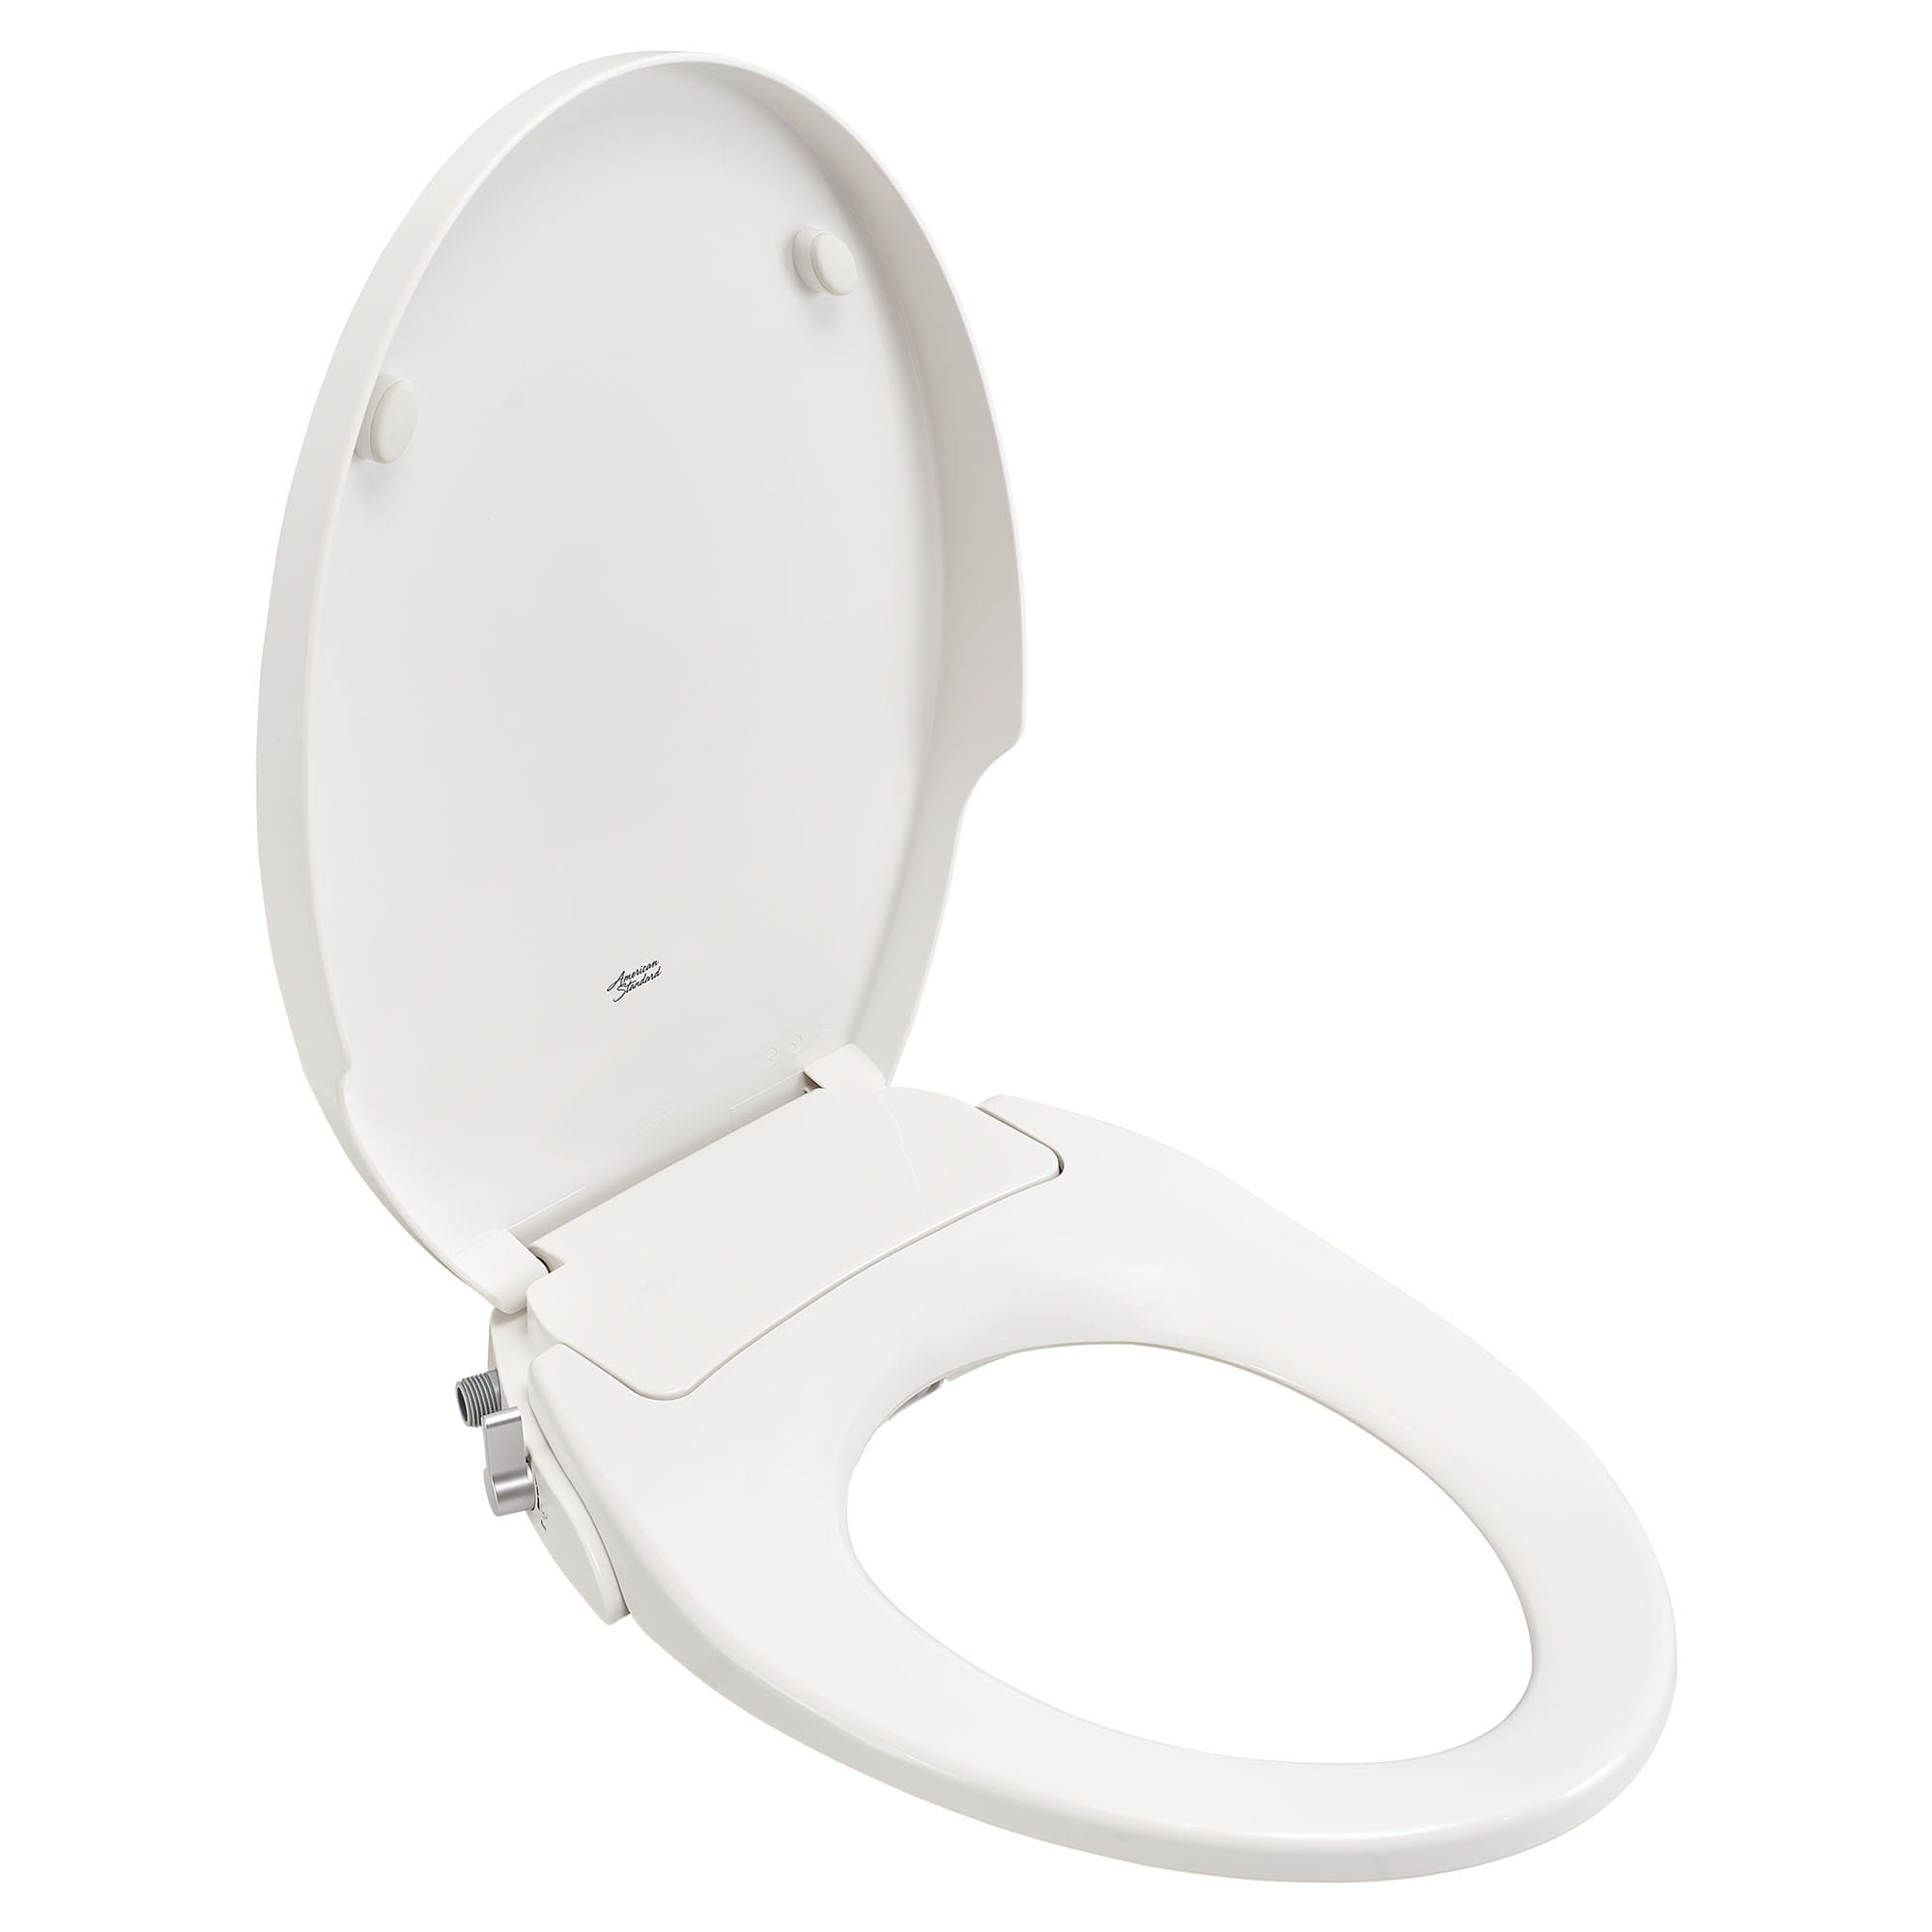 AquaWash 1.0 Non-Electric SpaLet Bidet Seat with Manual Operation